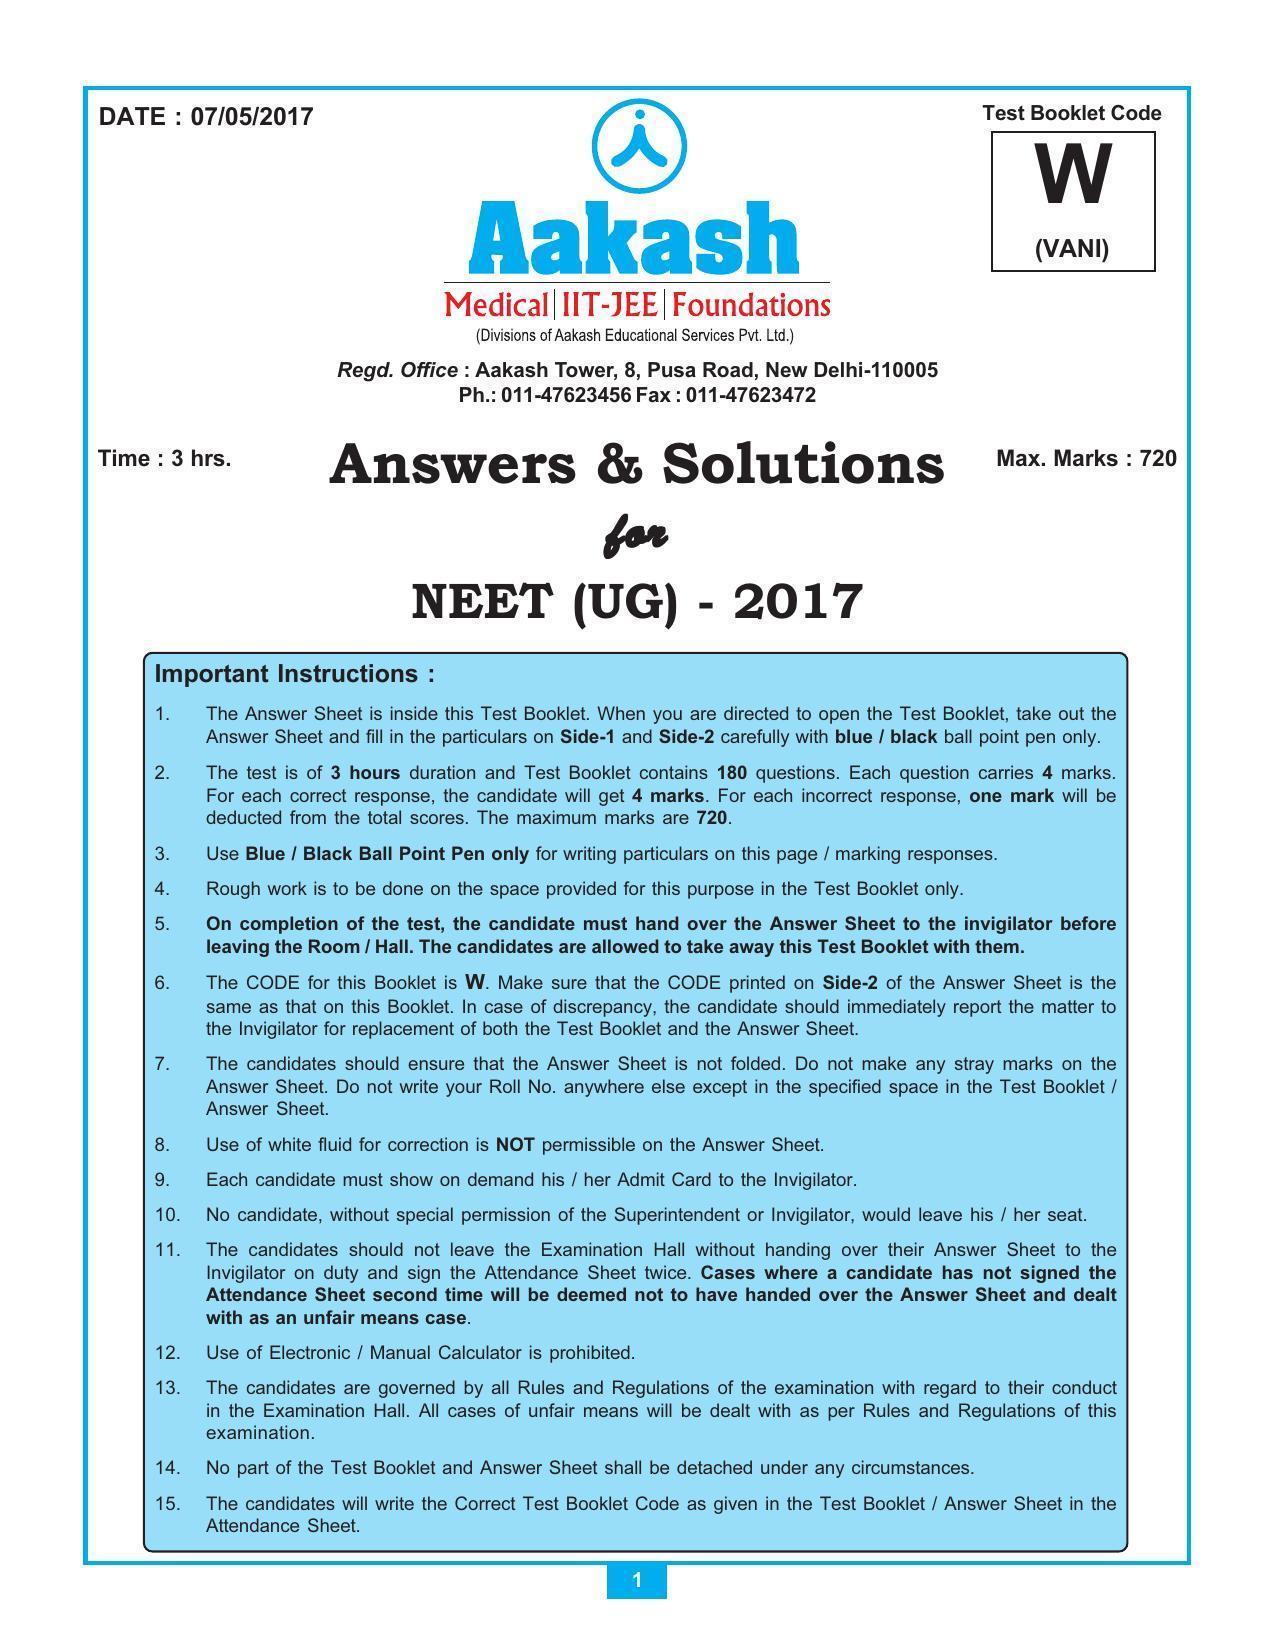  NEET Code W 2017 Answer & Solutions - Page 1